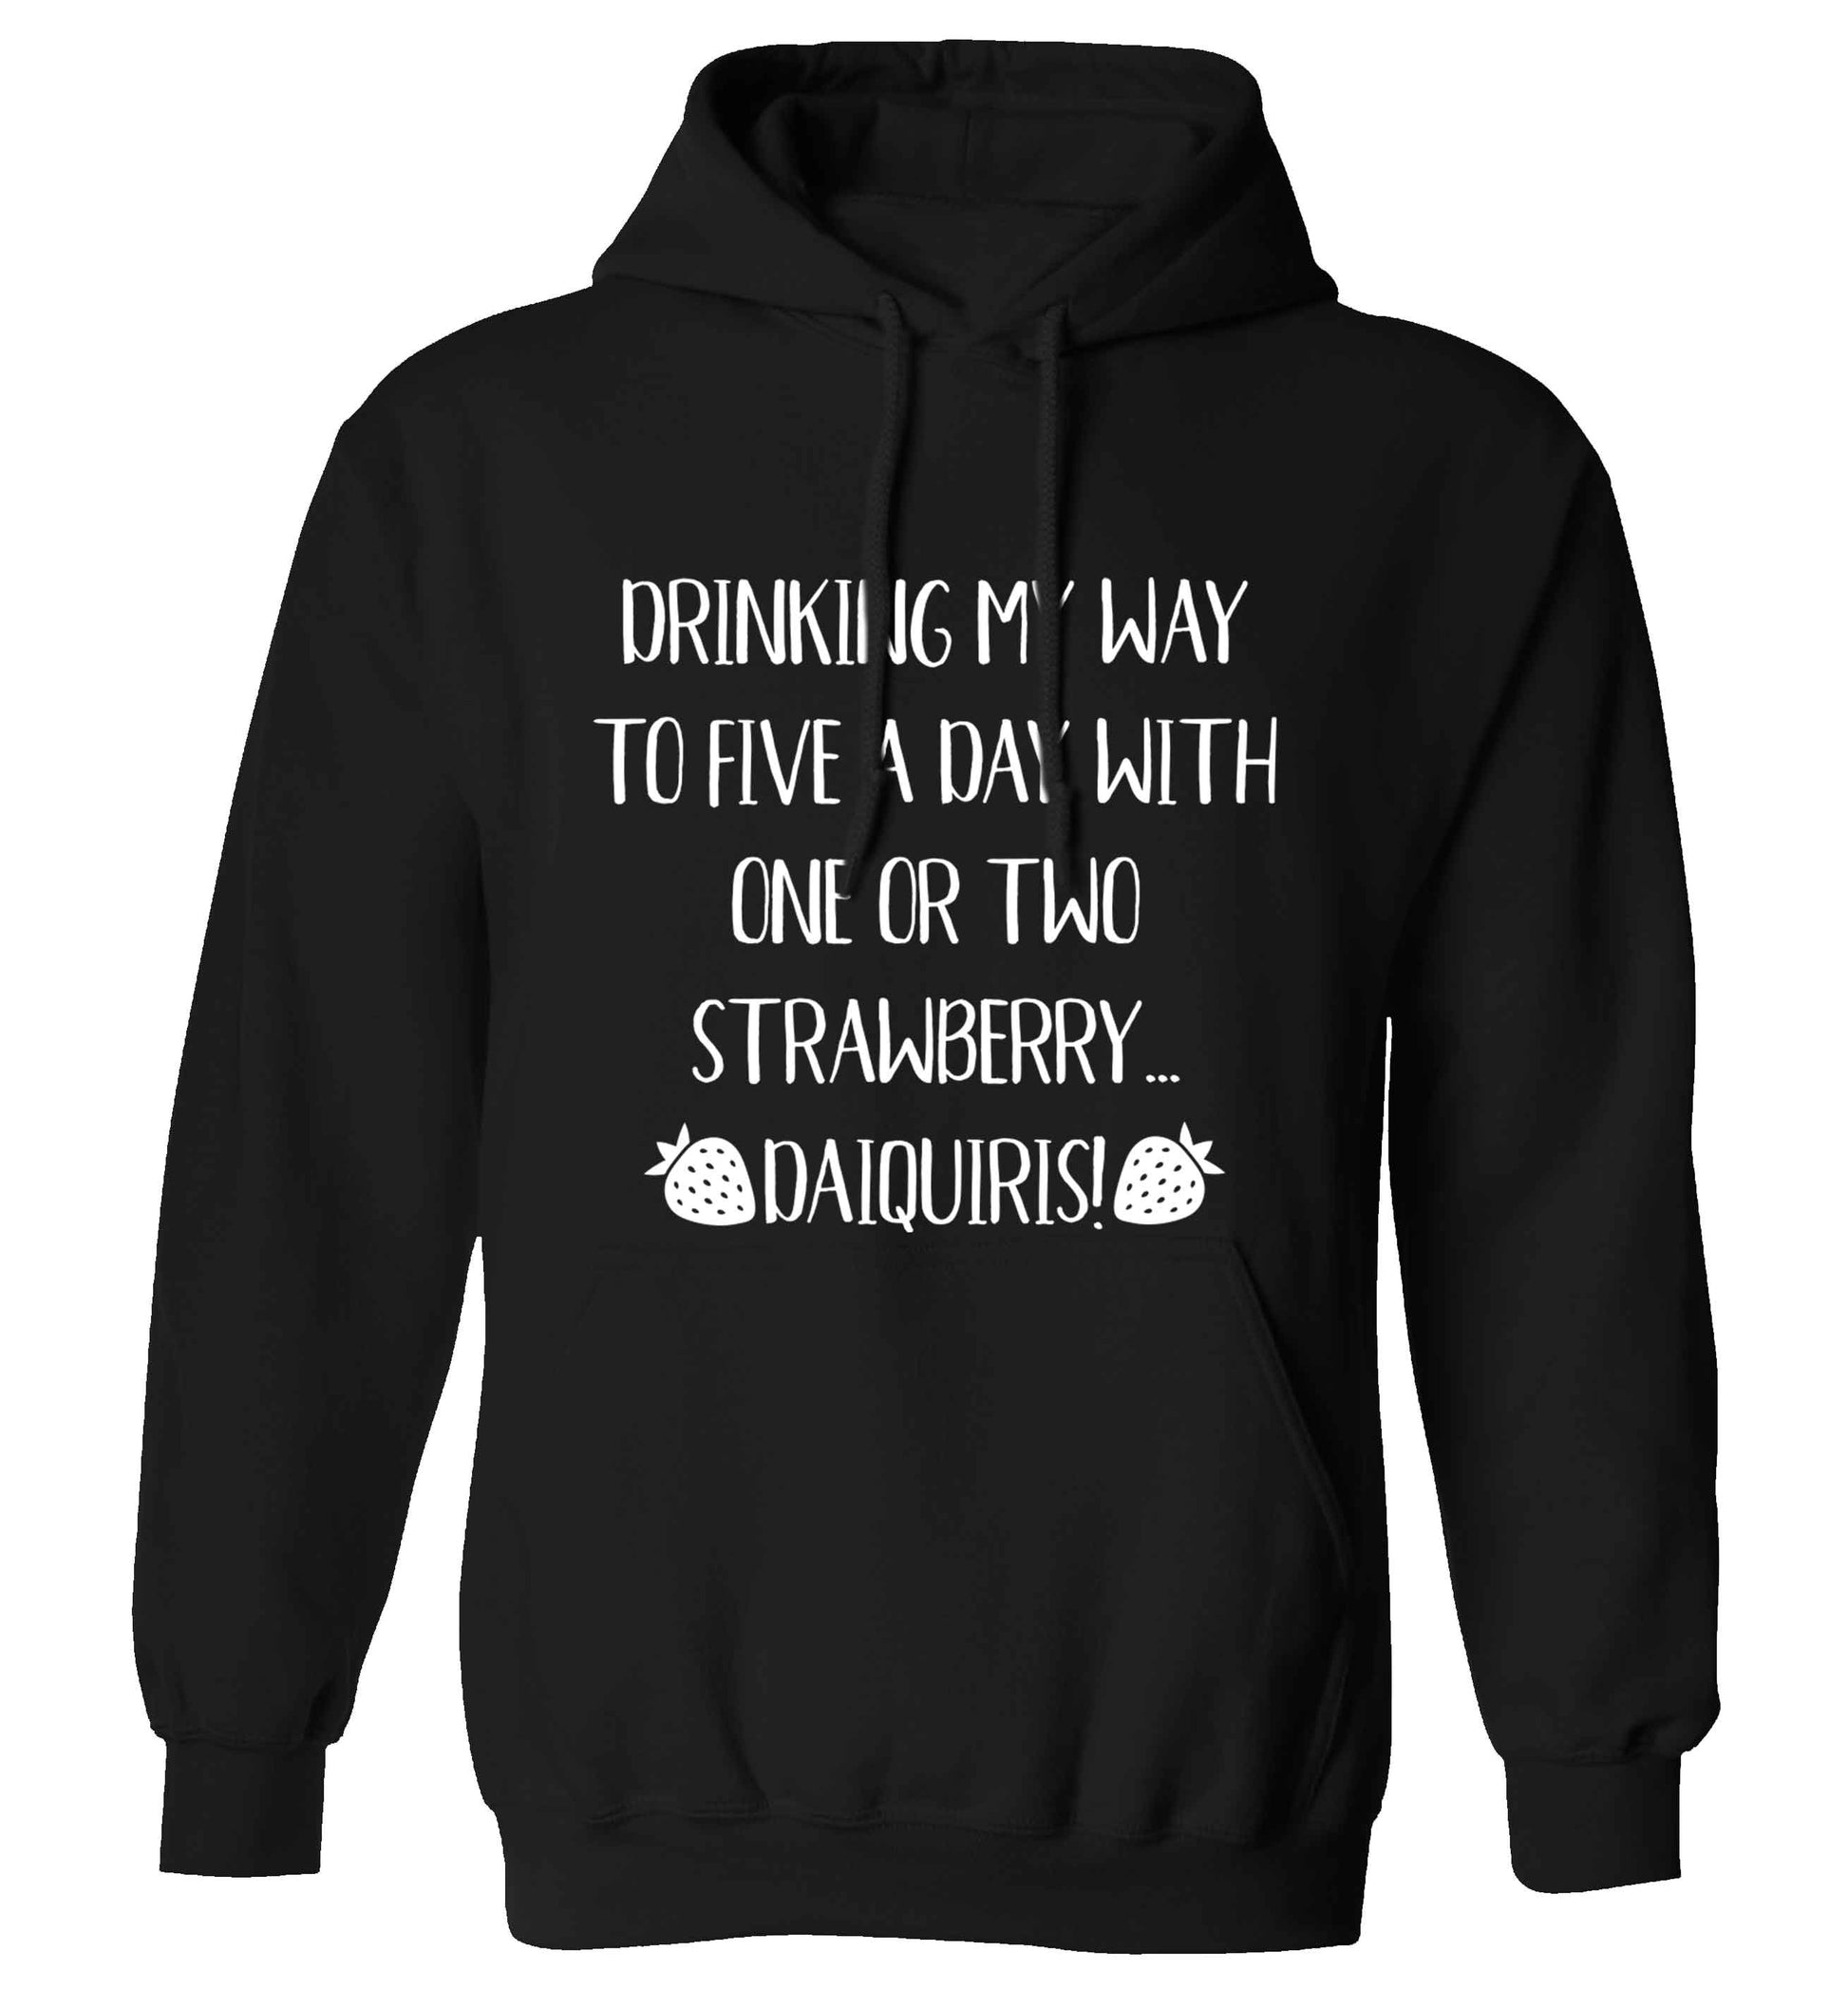 Drinking my way to five a day with one or two straberry daiquiris adults unisex black hoodie 2XL